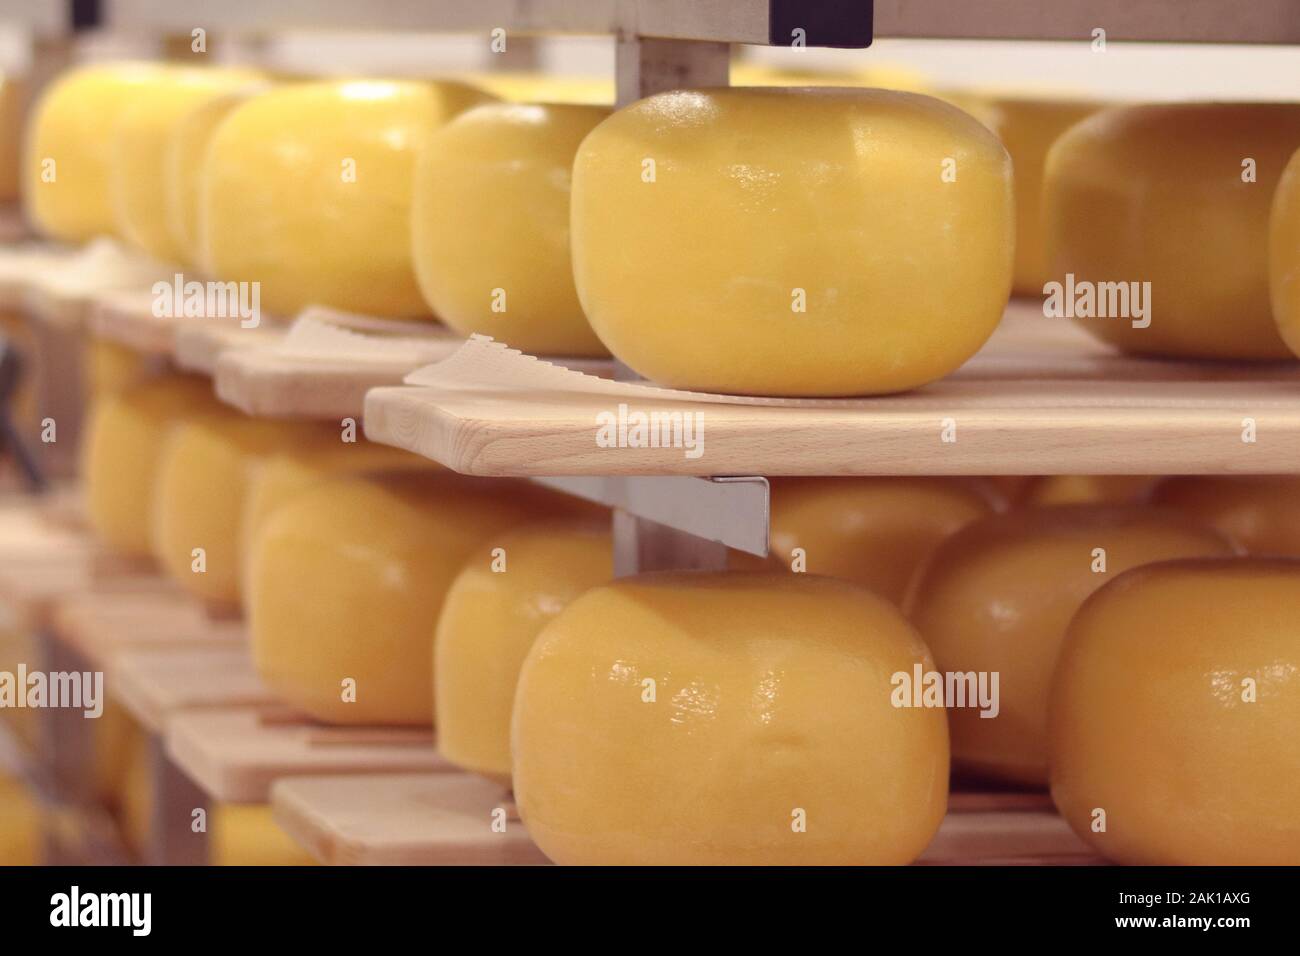 https://c8.alamy.com/comp/2AK1AXG/yellow-loaves-of-hard-cheese-stored-in-a-cold-dairy-cellar-2AK1AXG.jpg